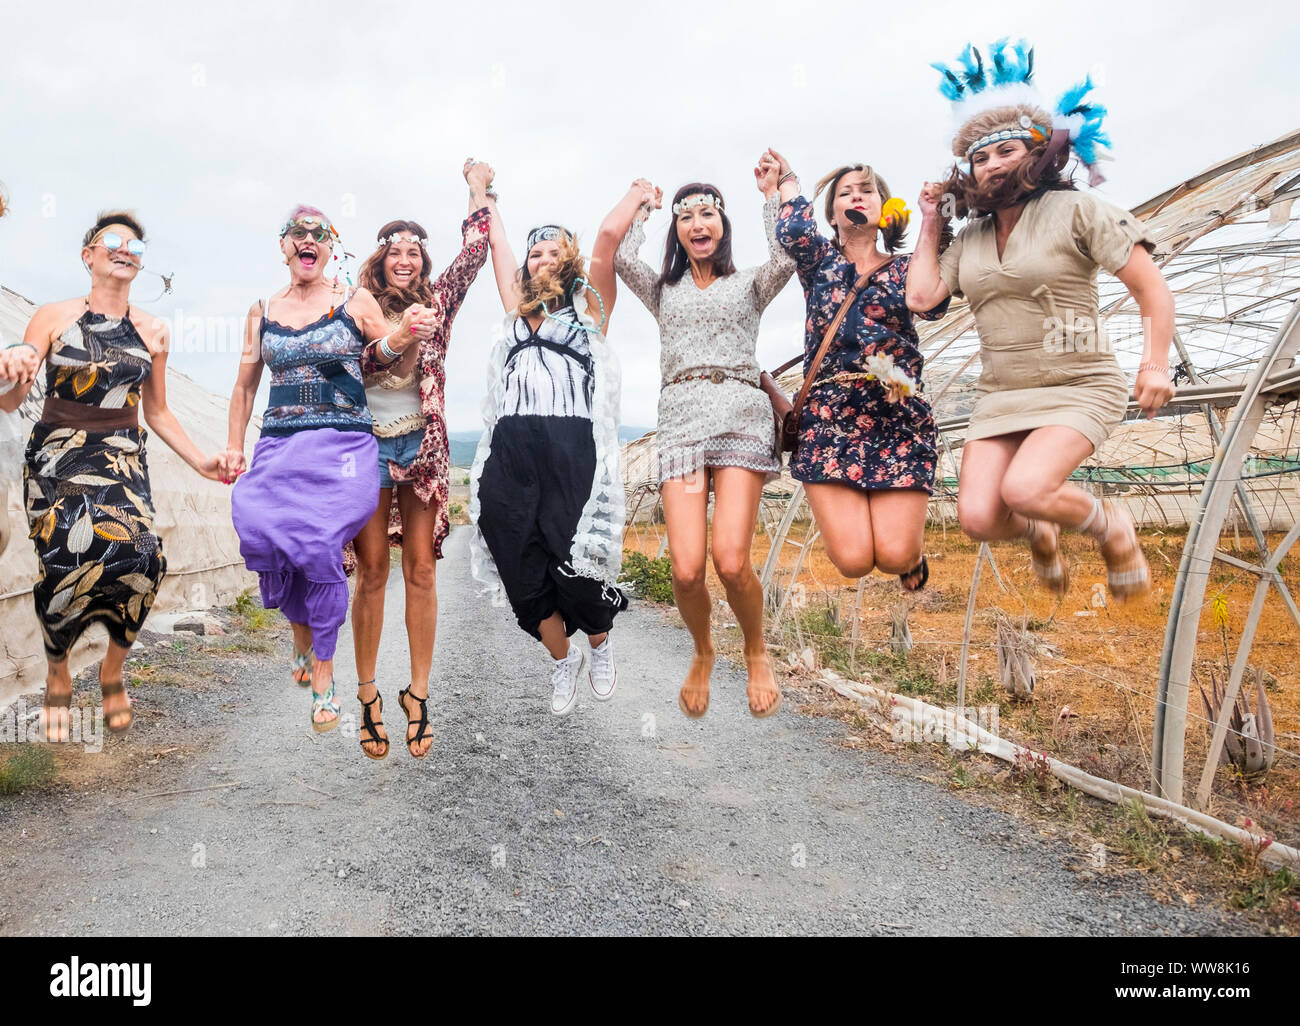 party on with many beautiful females mixed ages from young to middle to old ones everybody jump with joy. hippy and alternative dresses and summer festival concept outside in the countryside Stock Photo